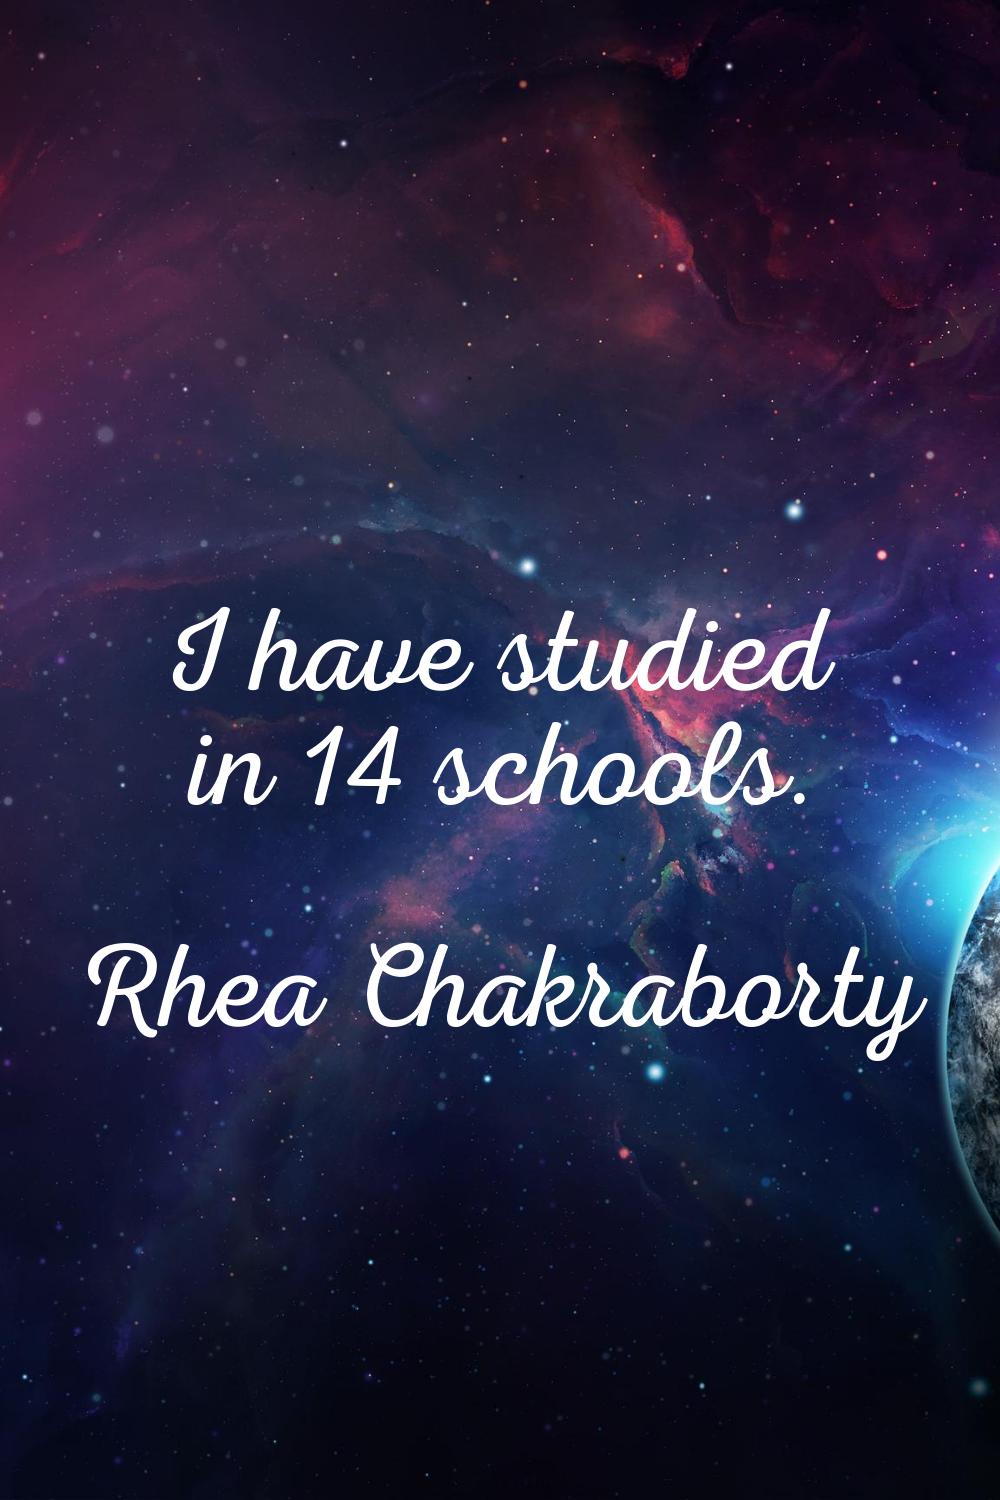 I have studied in 14 schools.